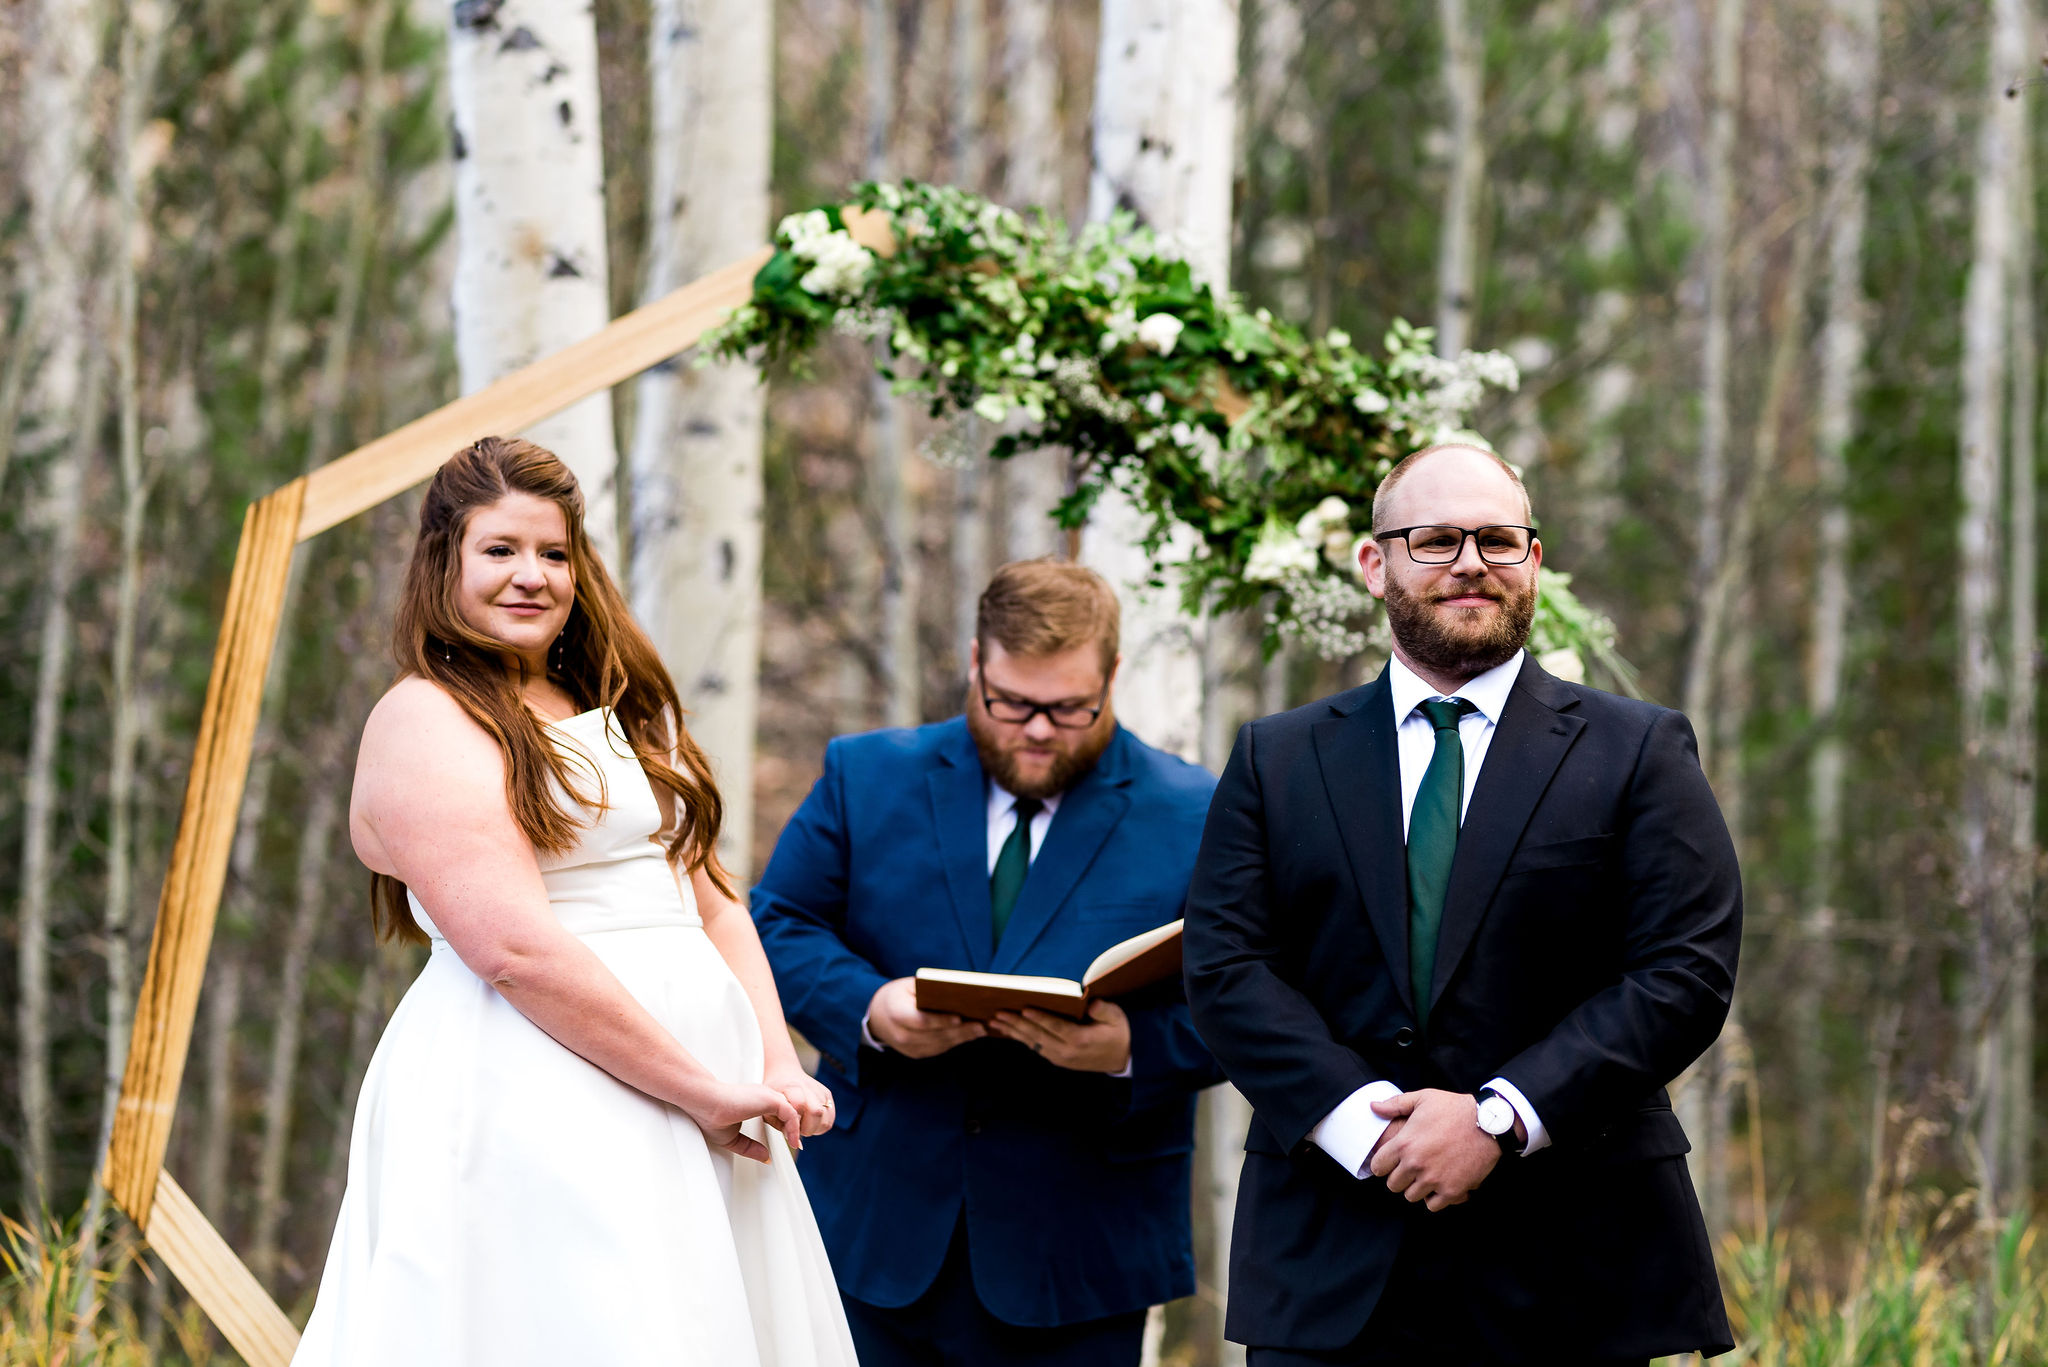 Breckenridge wedding photography by photographer Lauren Lindley at a private estate in Summit County, CO.